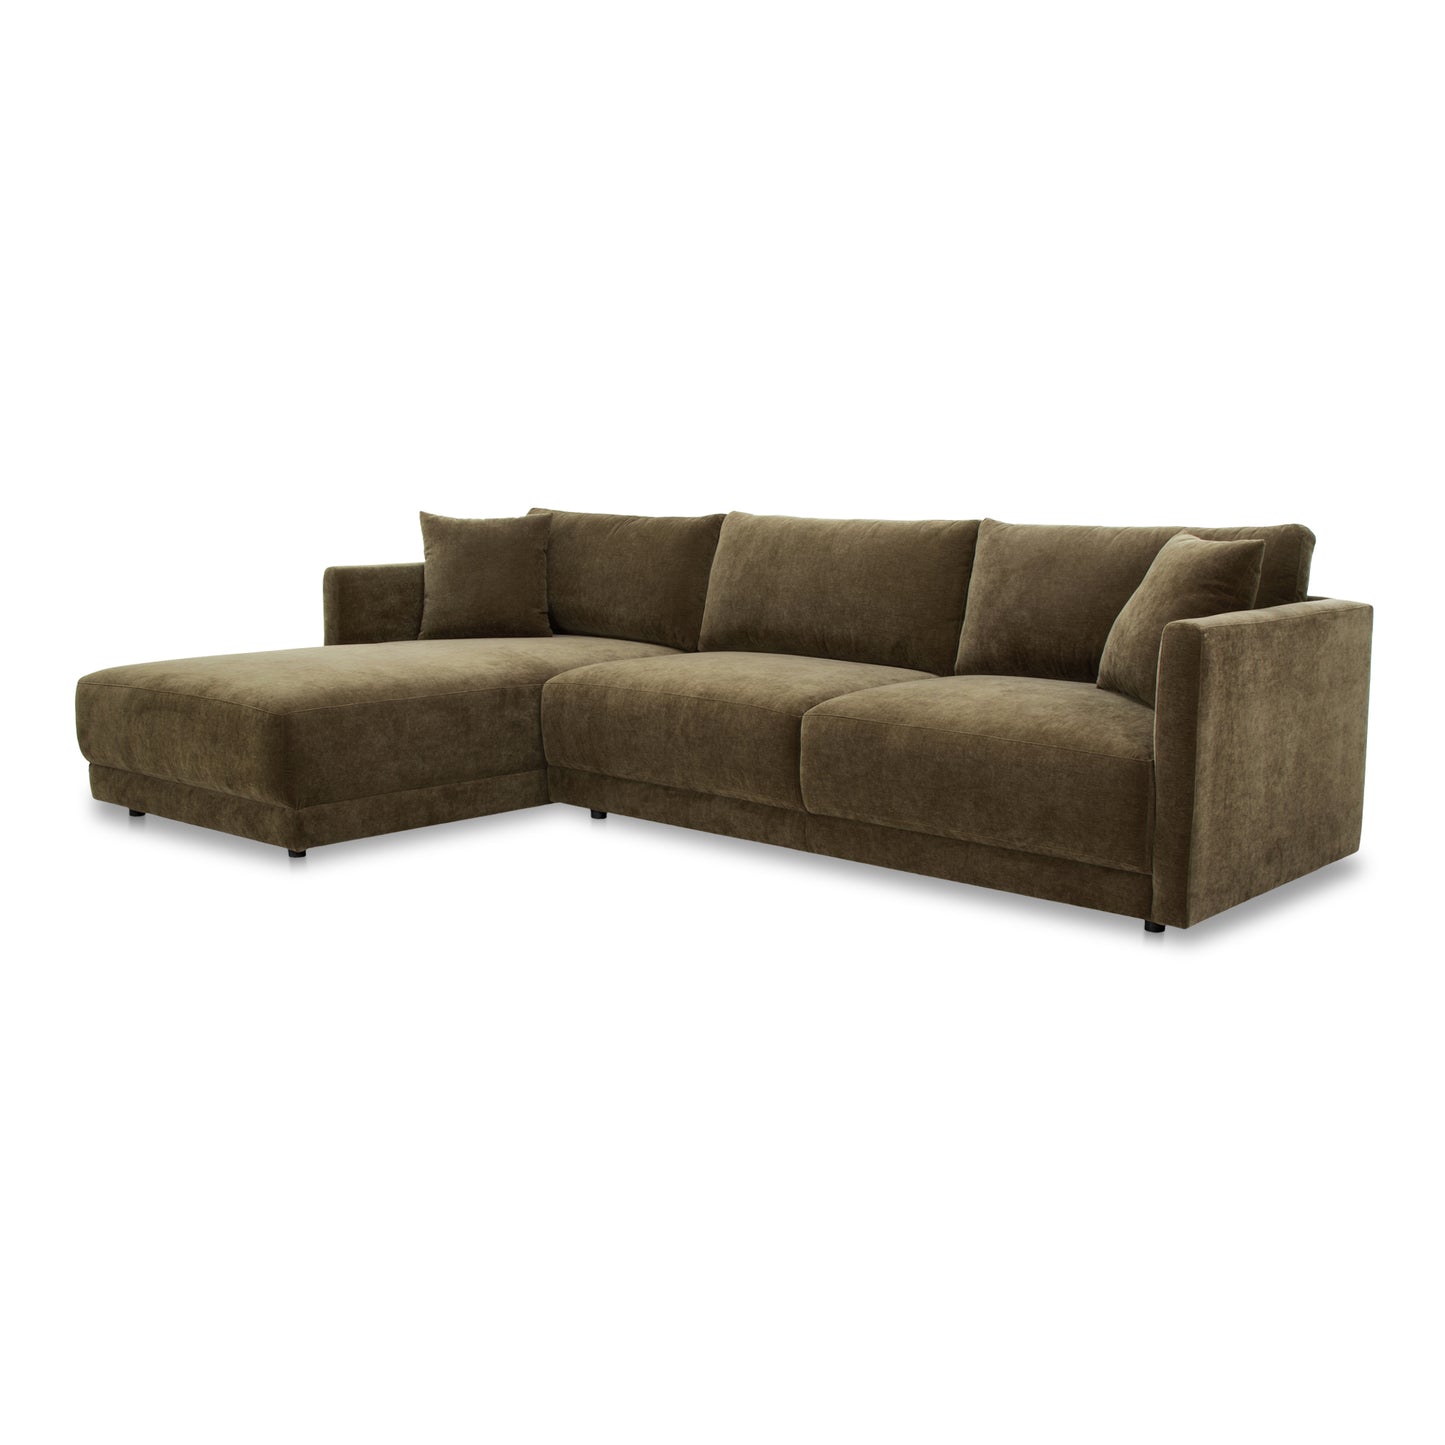 Bryn Sectional Sectional Moe's    Four Hands, Mid Century Modern Furniture, Old Bones Furniture Company, Old Bones Co, Modern Mid Century, Designer Furniture, Furniture Sale, Warehouse Furniture Sale, Bryn Sectional Sale, https://www.oldbonesco.com/